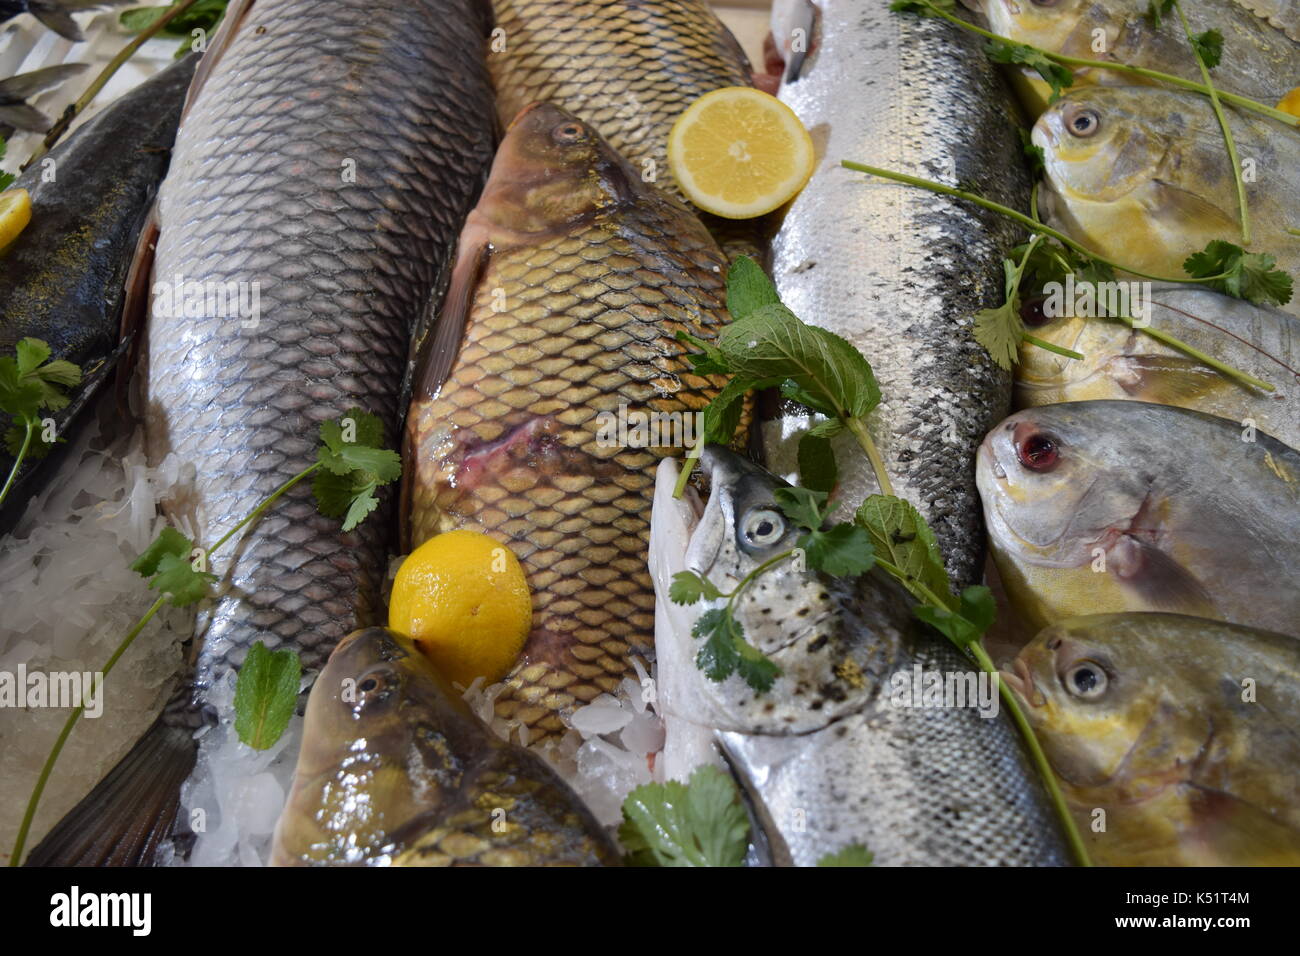 Raw fish with ice at market Stock Photo